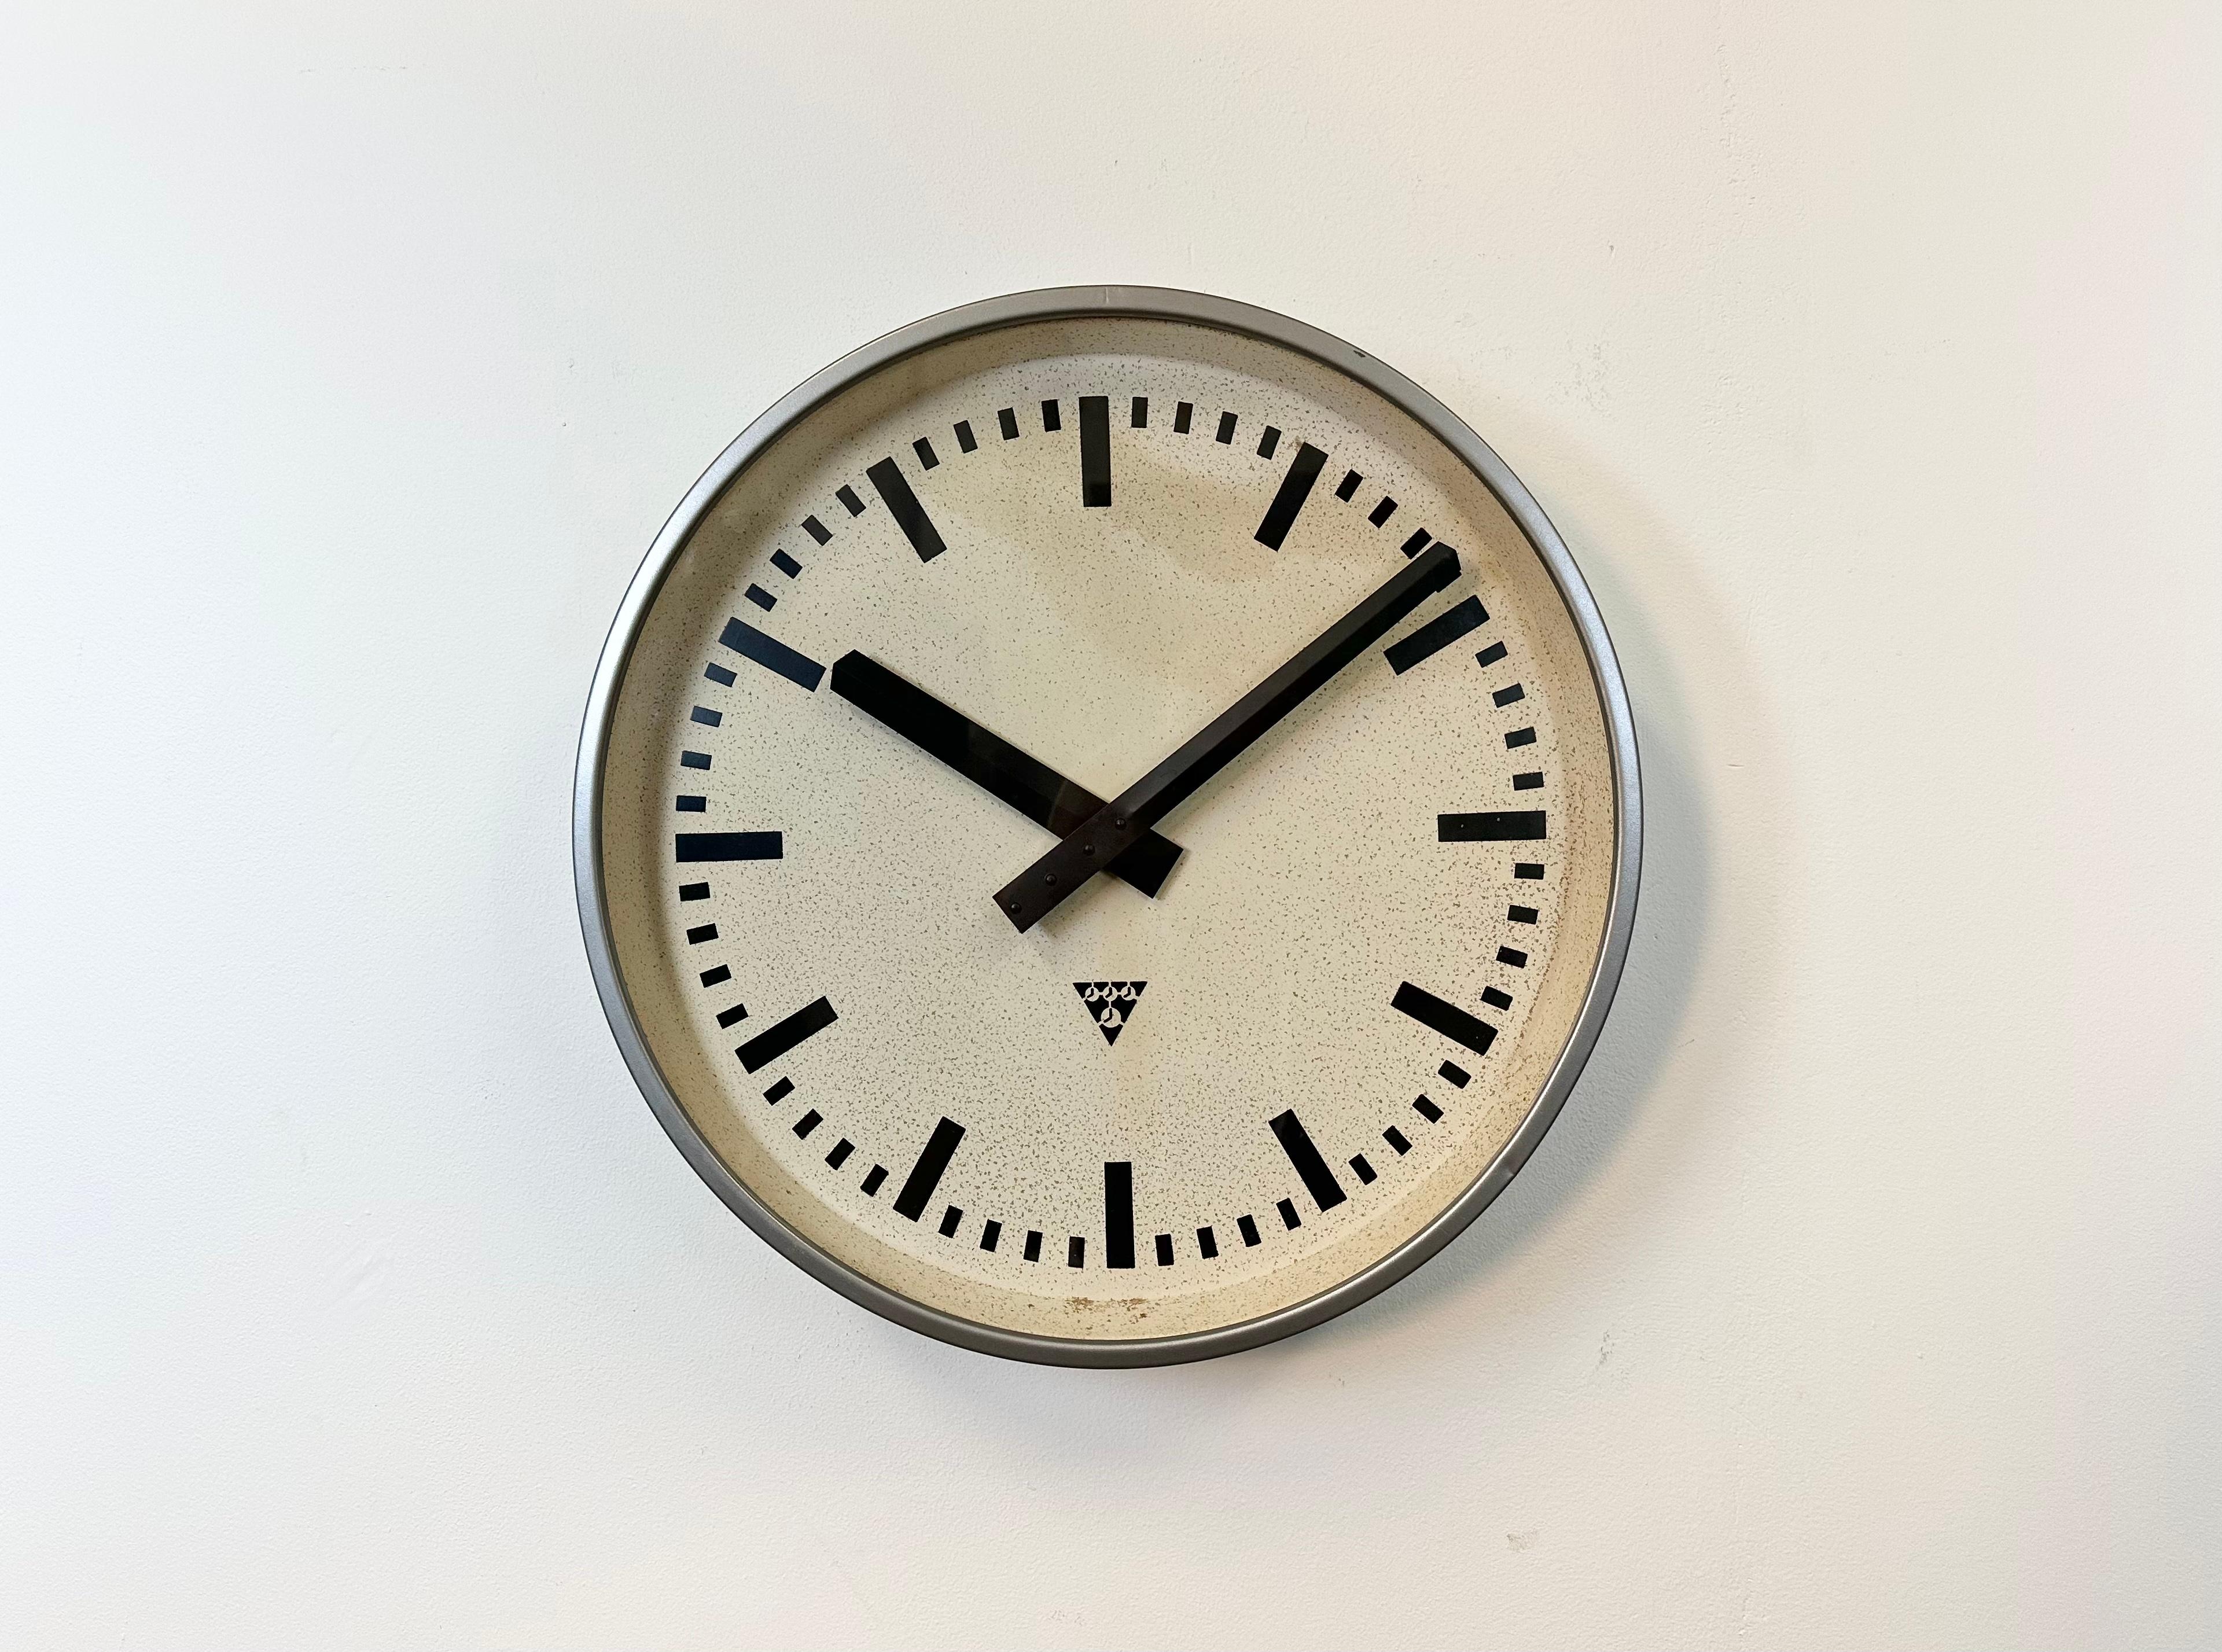 Pragotron wall clock made in former Czechoslovakia during the 1960s. It features a gray metal frame, a metal dial and clear glass cover. The piece has been converted into a battery-powered clockwork and requires only one AA-battery. The diameter of